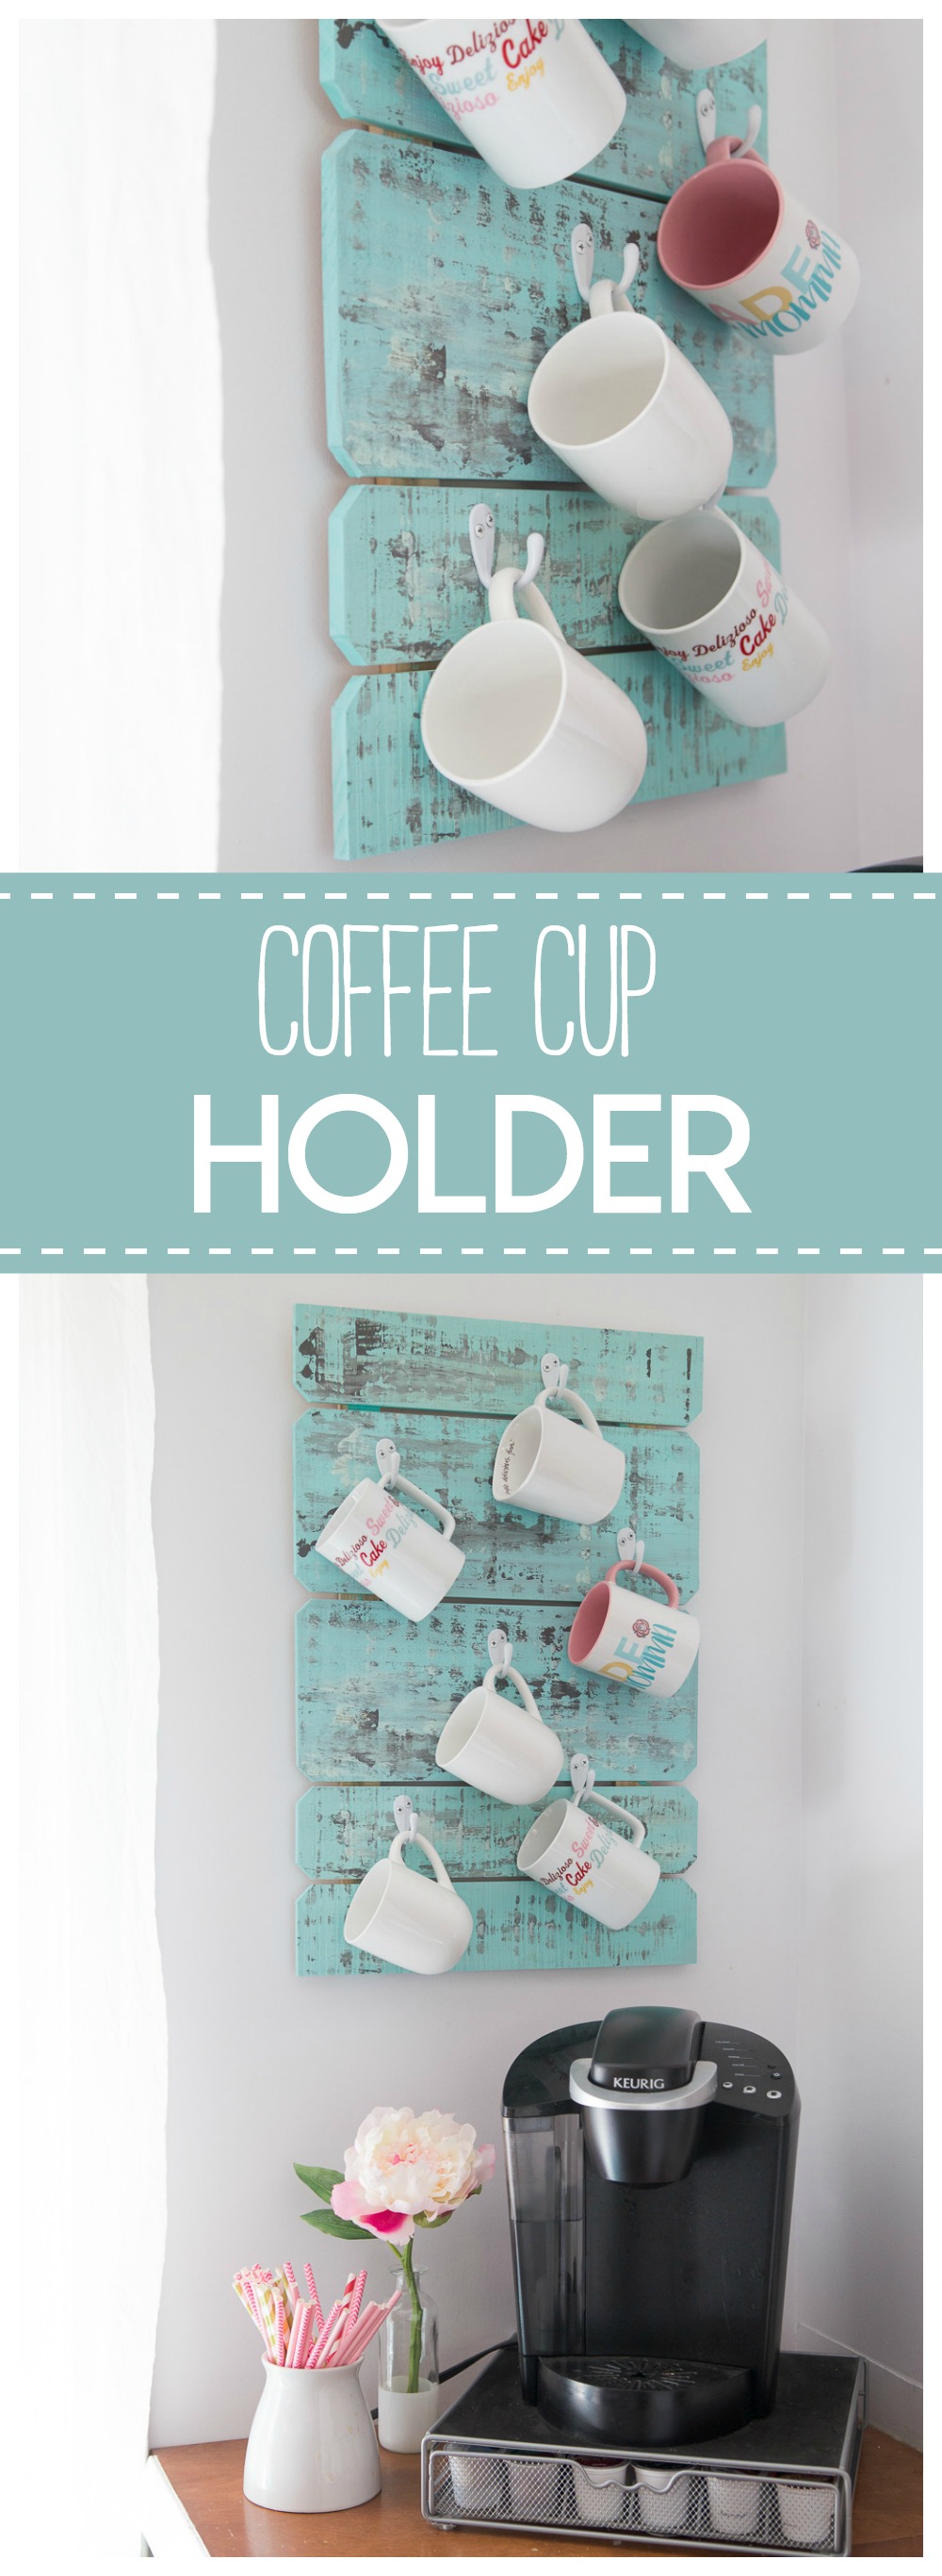 This coffee cup holder is a simple & pretty diy project to organize your coffee mugs. 